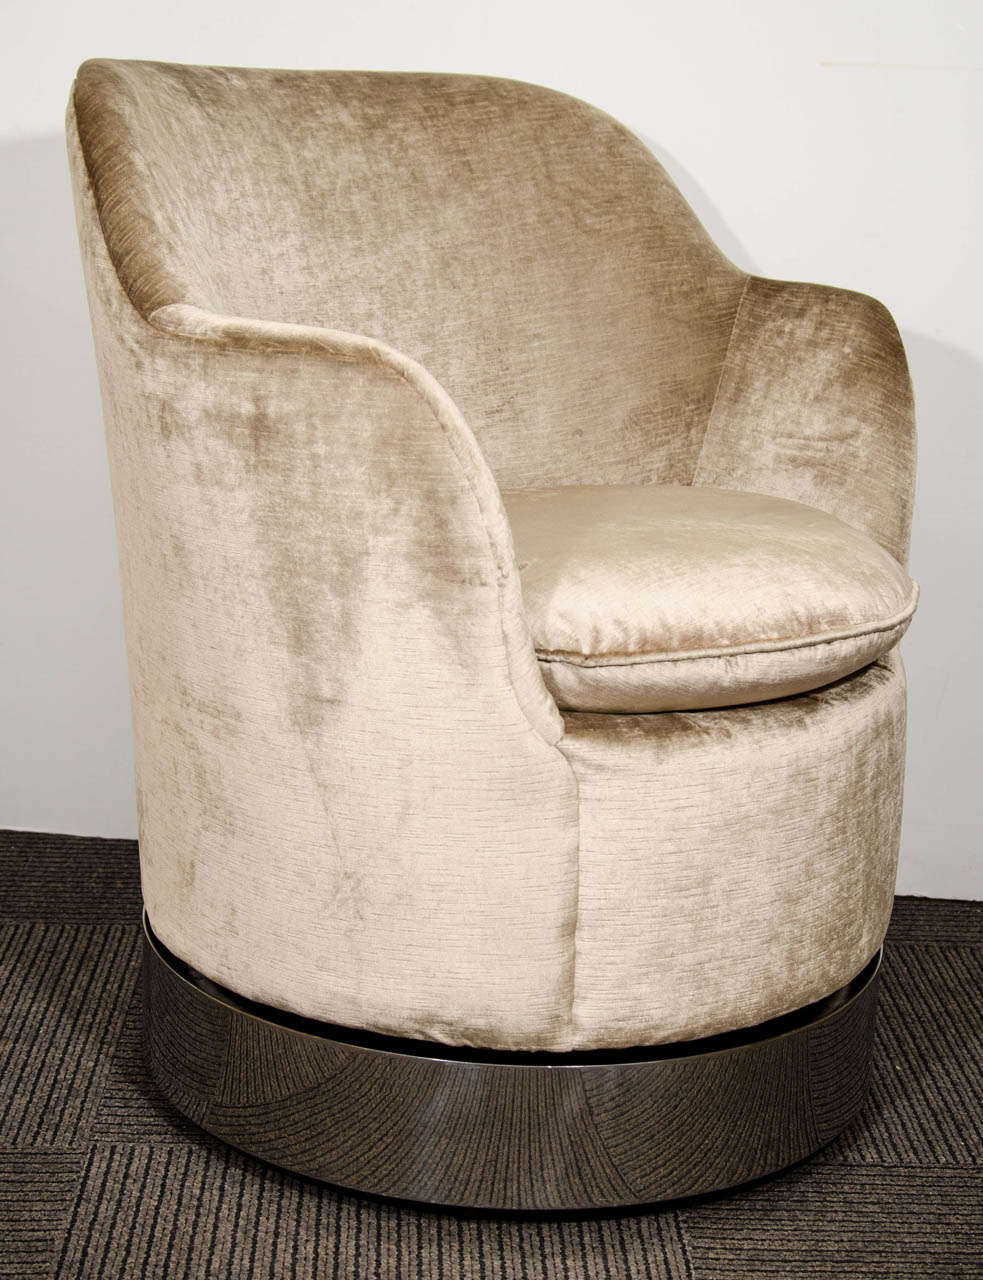 A vintage pair of barrel back cappuccino colored swivel chairs with chrome over steel base by Philip Enfield.

Good vintage condition with some wear to the upholstery and chrome finish.